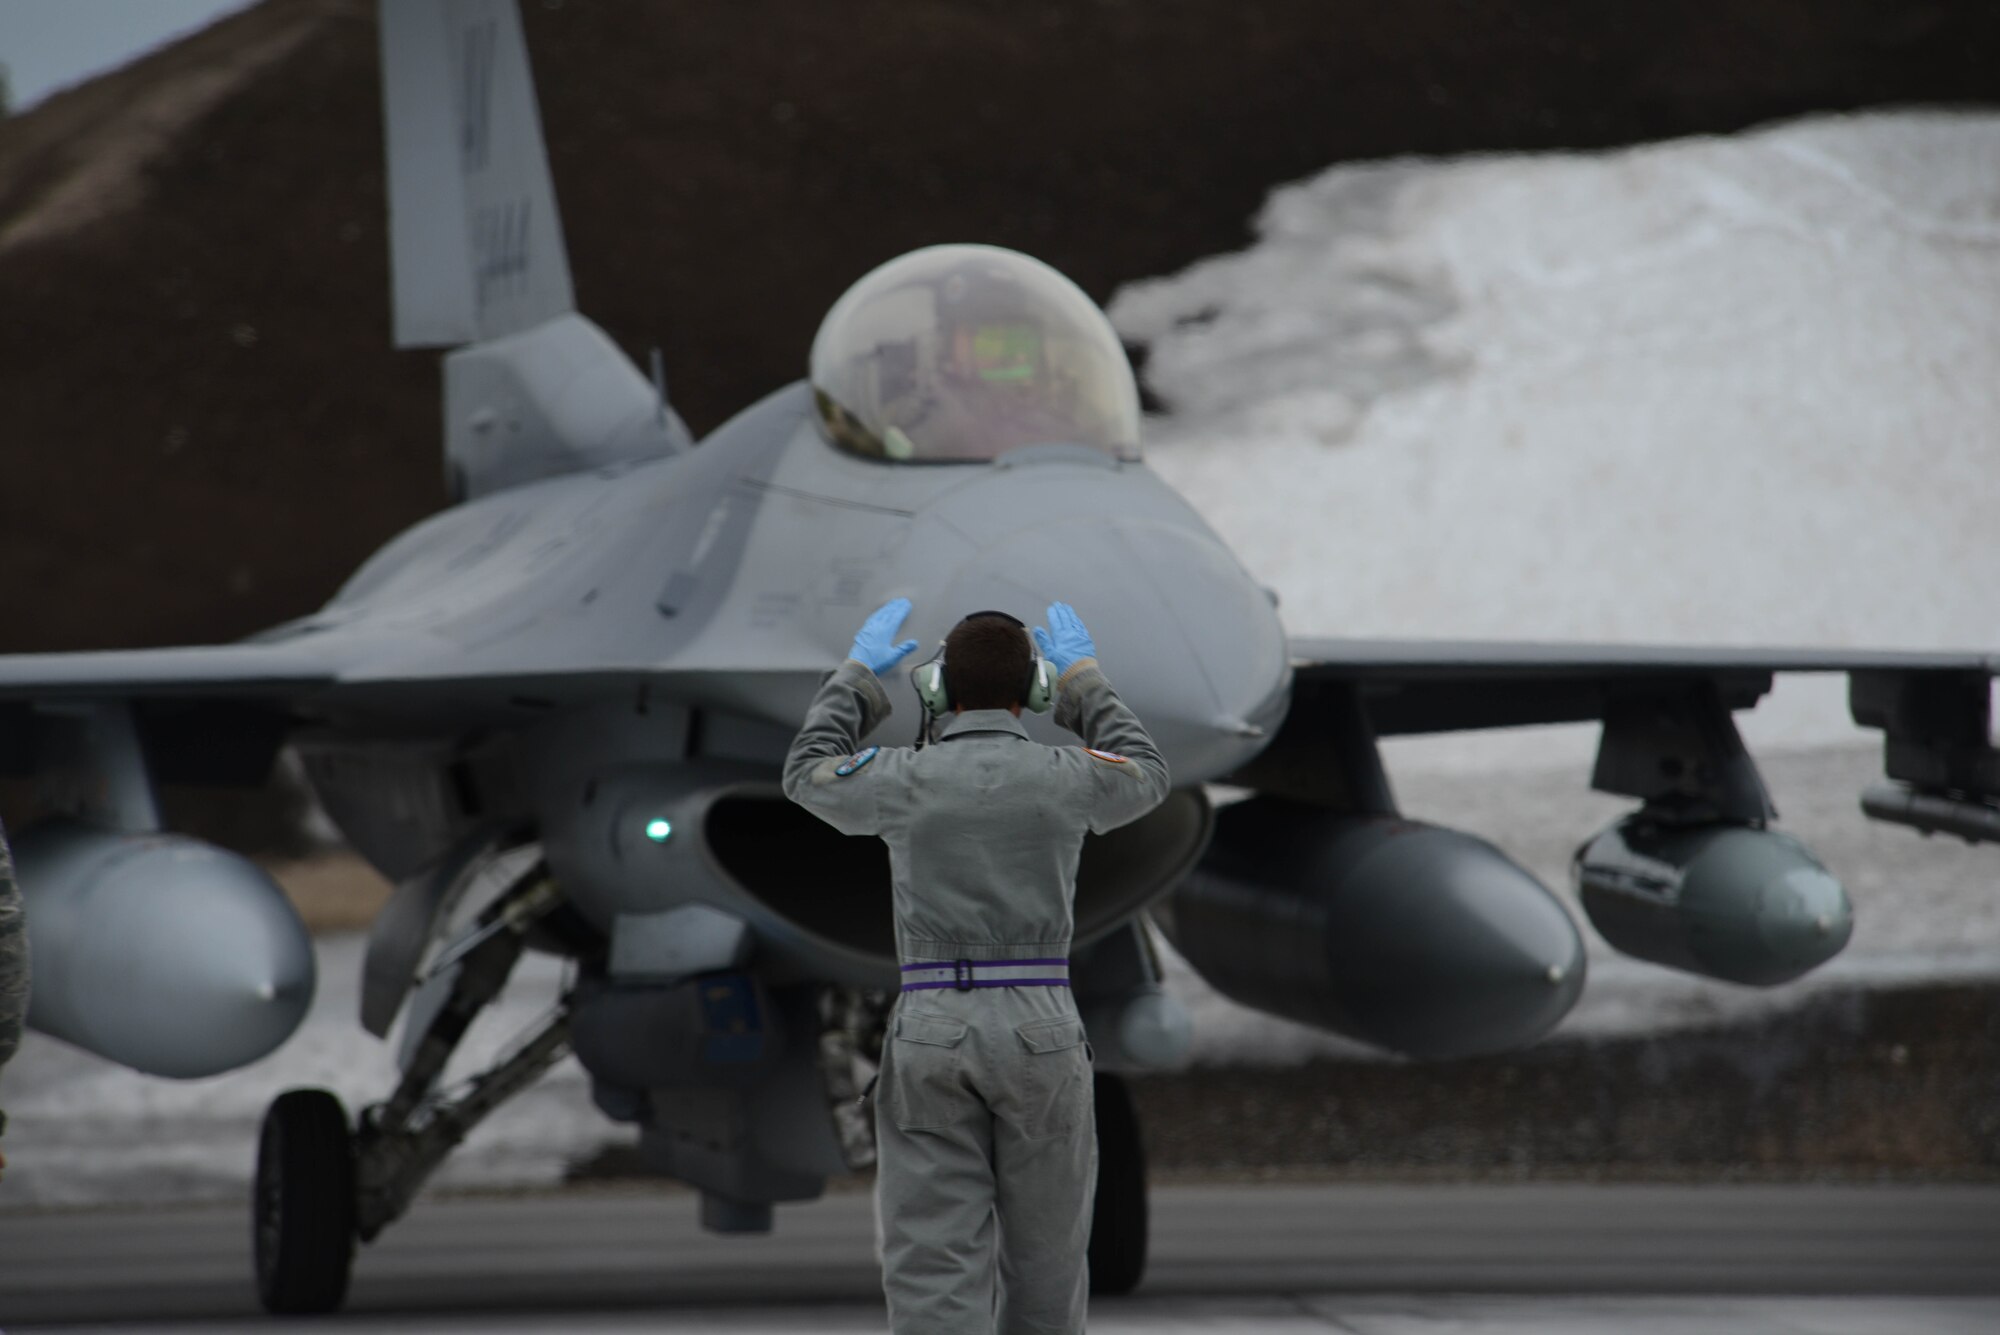 An Airman with the 510th Fighter Squadron from Aviano Air Base, Italy, guides an F-16 Fighting Falcon at Kallax Air Base, Sweden, May 22, 2015. The 510th FS took part in Arctic Challenge Exercise 2015. Nine nations also participated during the exercise to help ensure interoperability, and strengthen relationships and engagements with NATO allies and Partners for Peace. (U.S. Air Force photo/Staff Sgt. Evelyn Chavez)